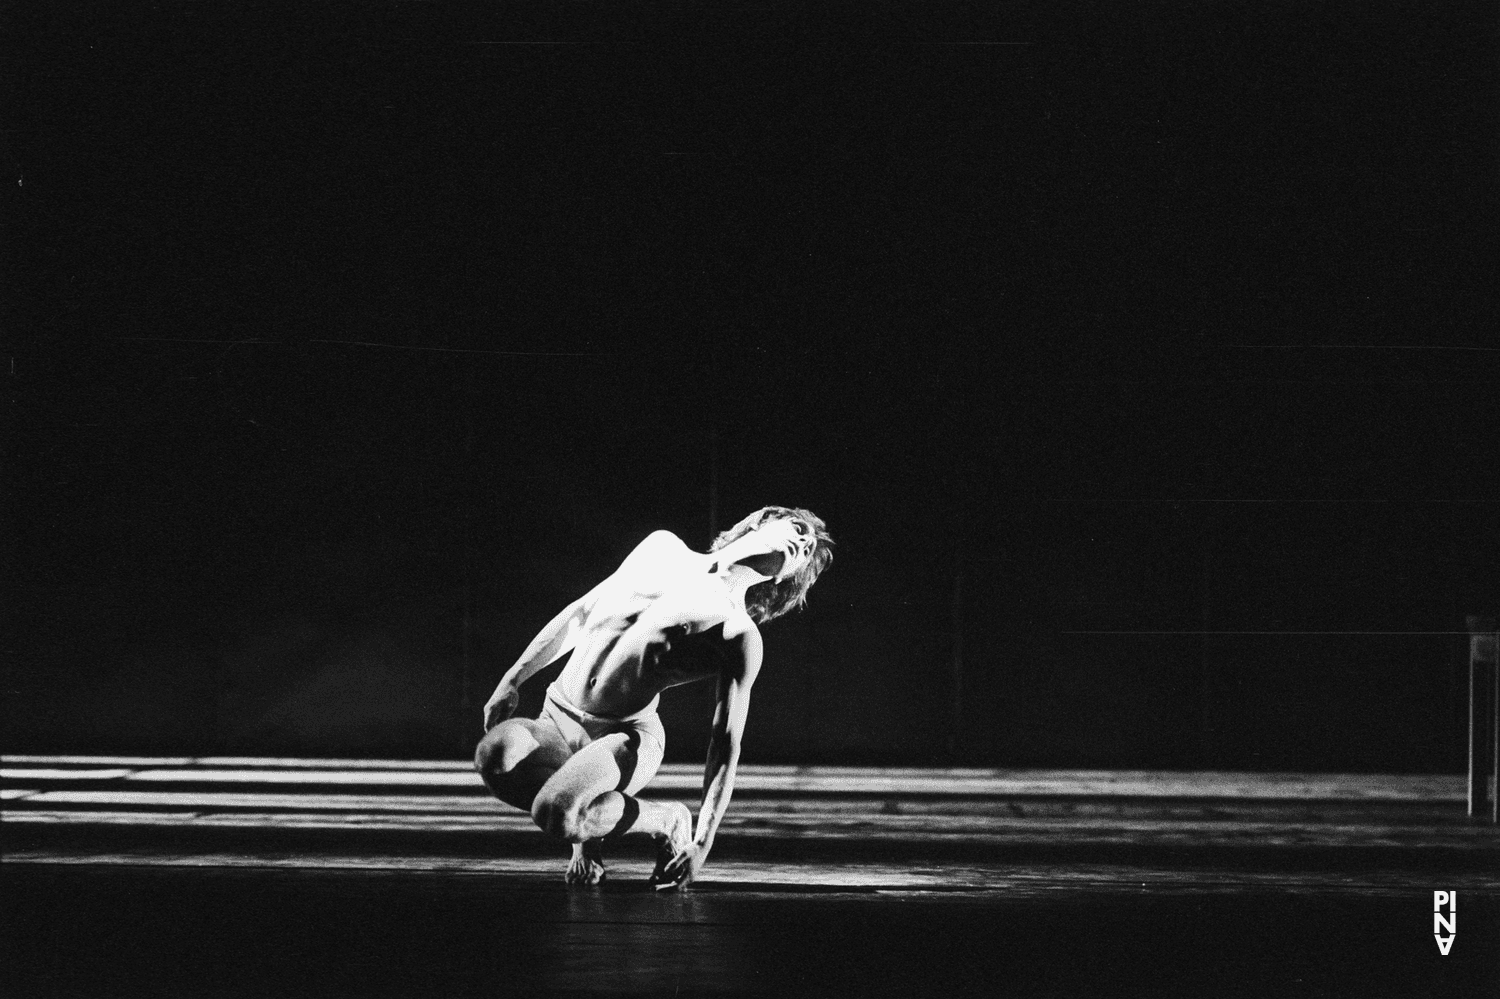 Ed Kortlandt in “Iphigenie auf Tauris” by Pina Bausch with Tanztheater Wuppertal at Opernhaus Wuppertal (Germany), April 20, 1974